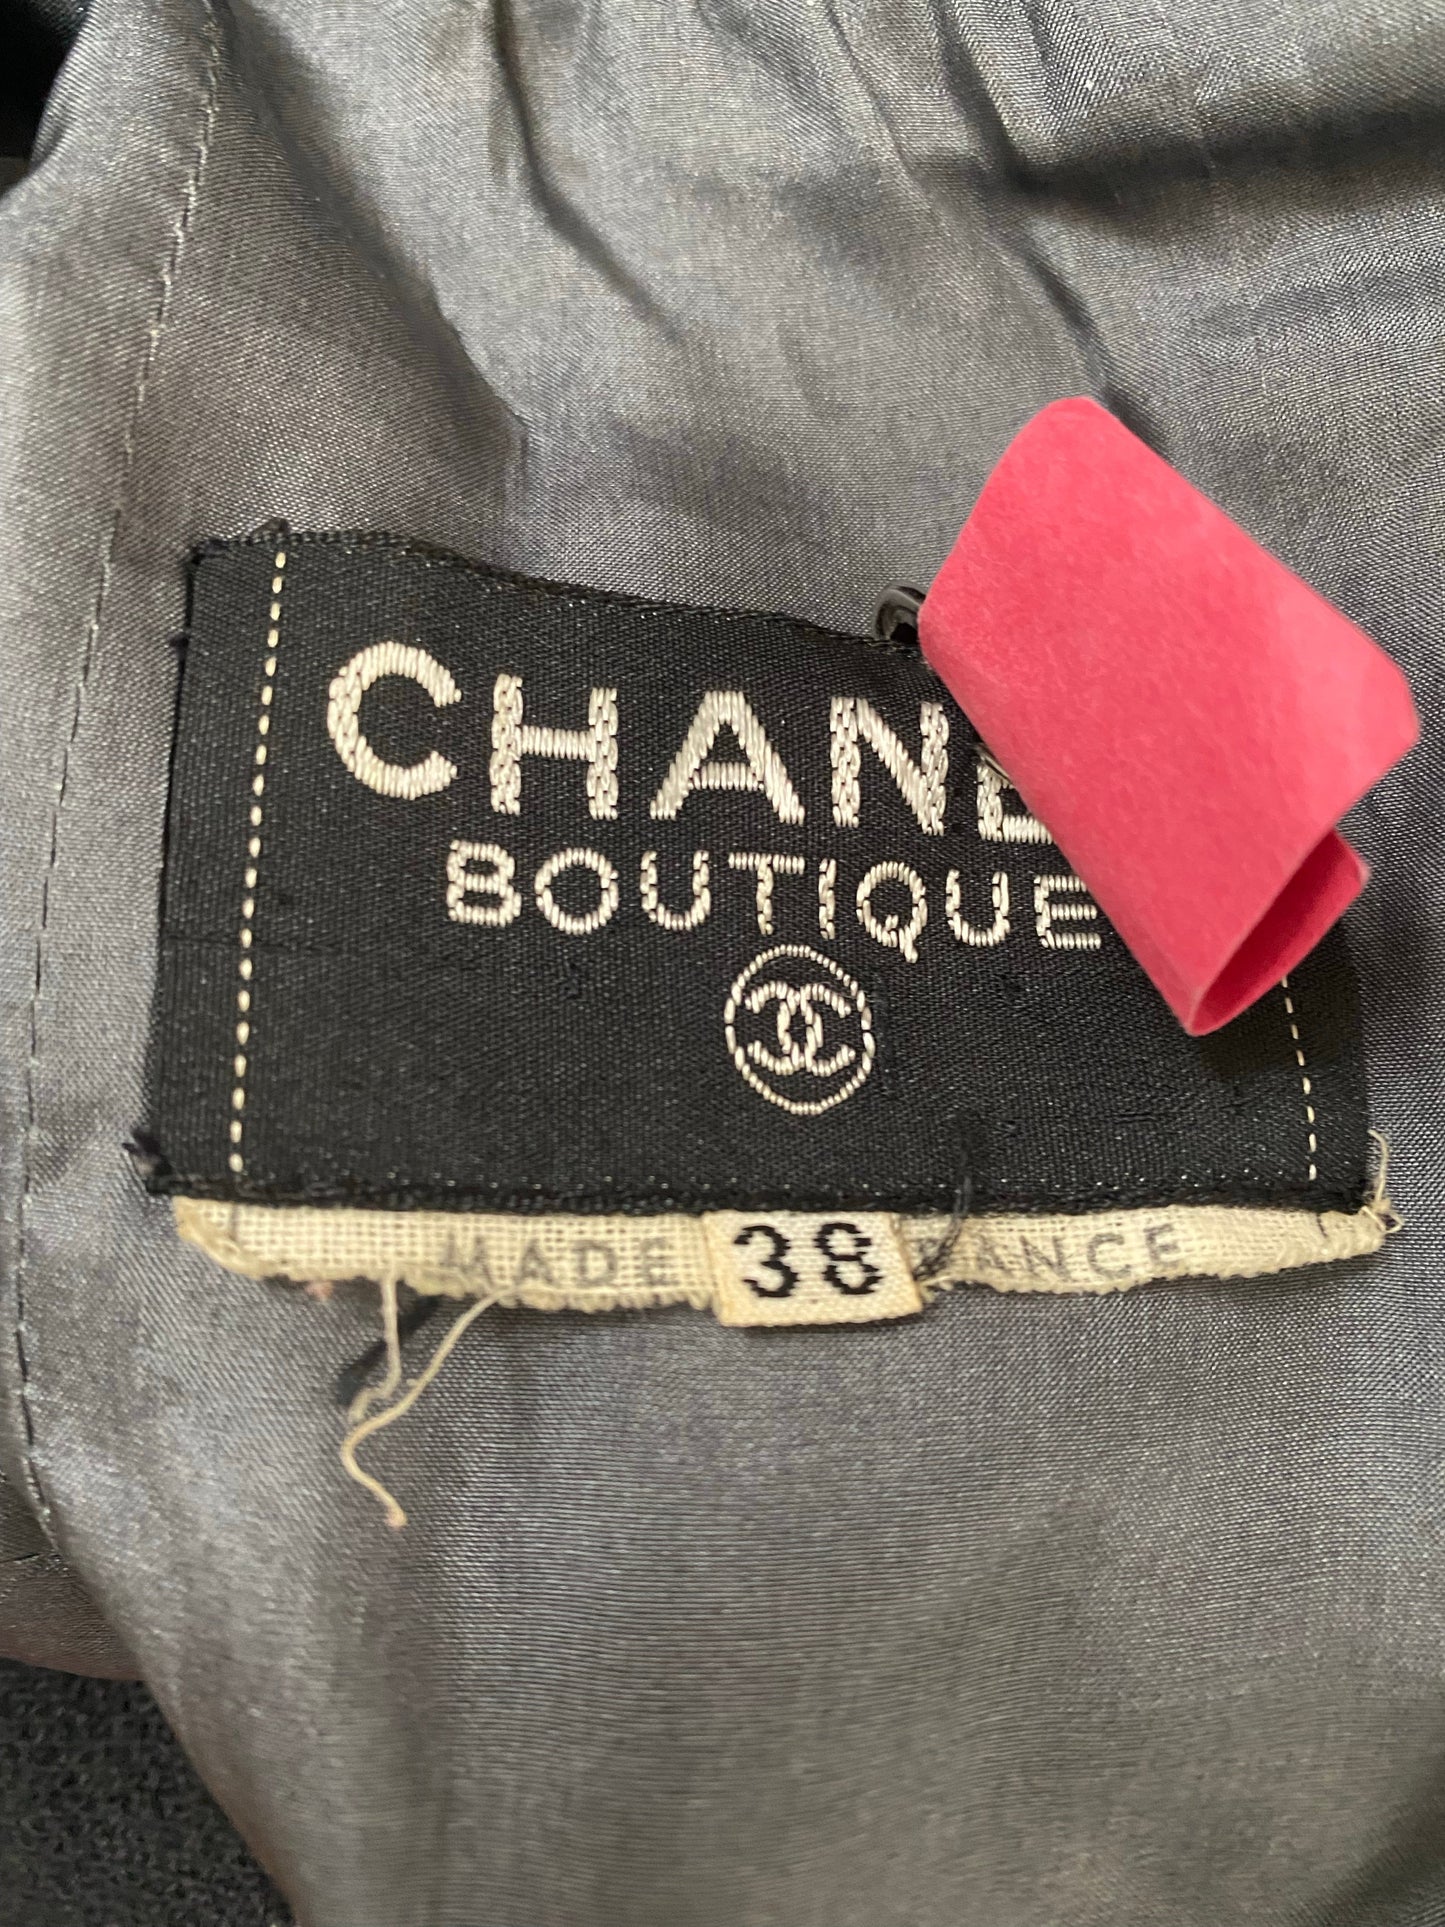 Vintage second hand Chanel dress in black and anthracite gray wool Lysis